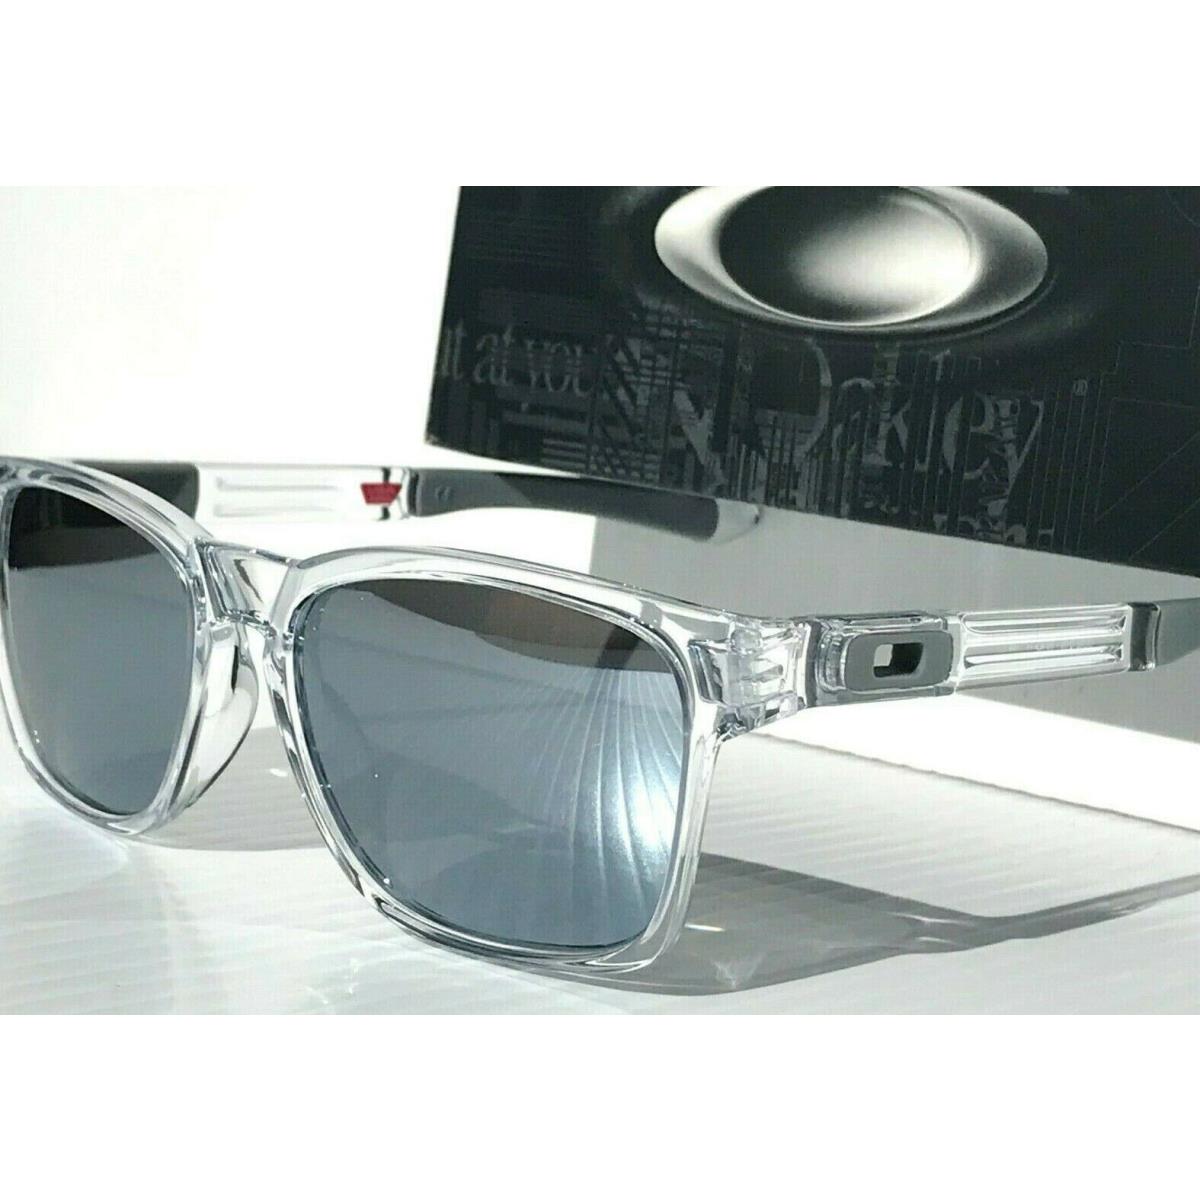 Oakley sunglasses Catalyst - Clear Frame, Silver Lens, Clear Manufacturer